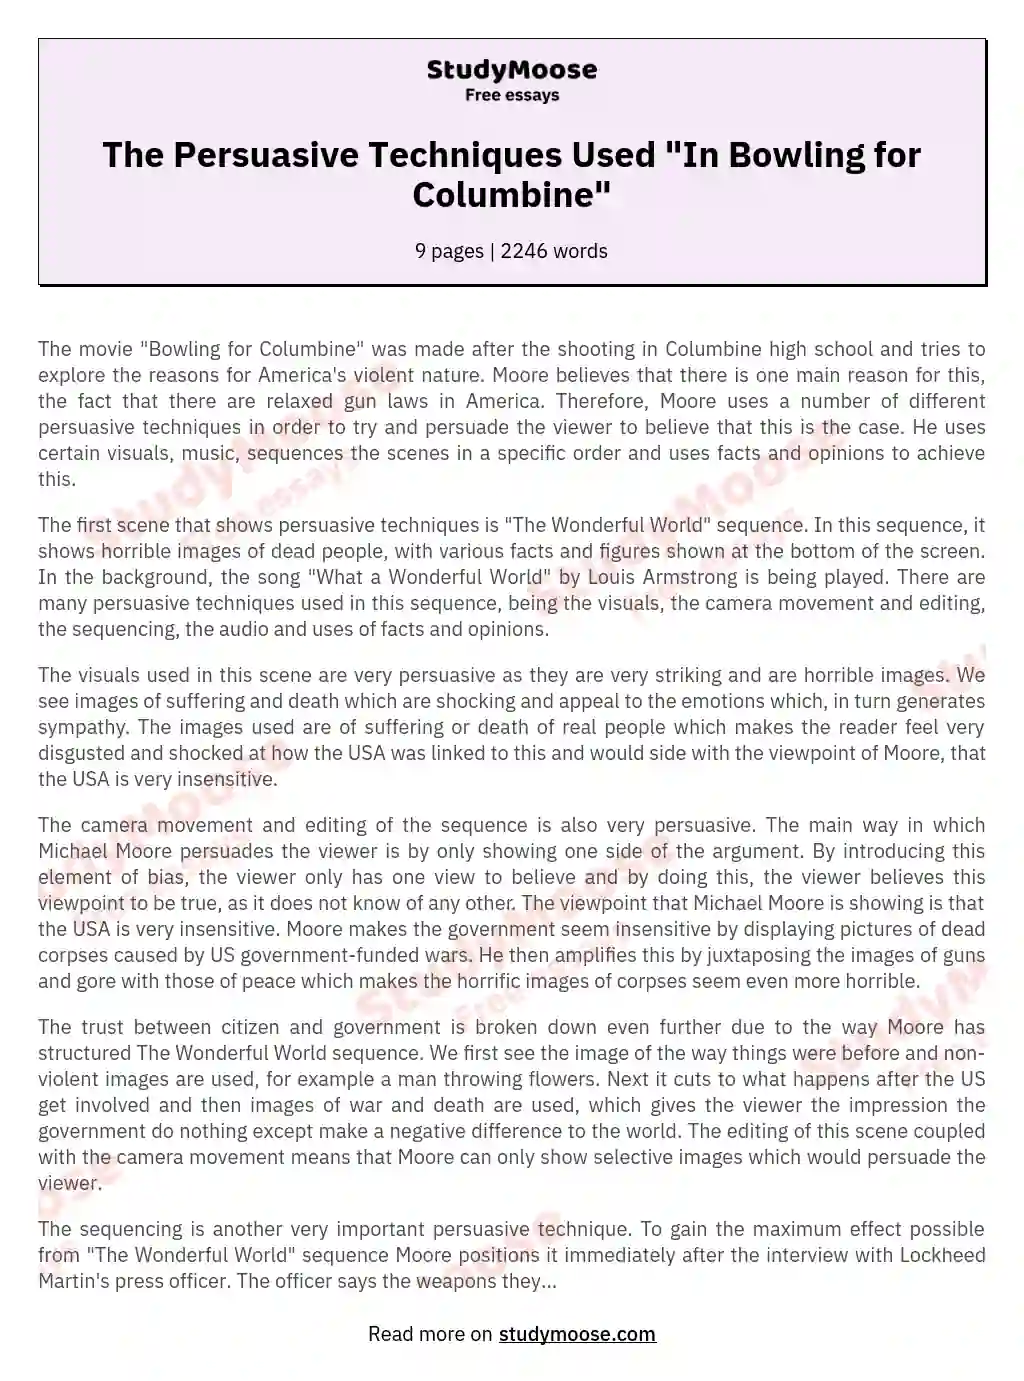 The Persuasive Techniques Used "In Bowling for Columbine" essay